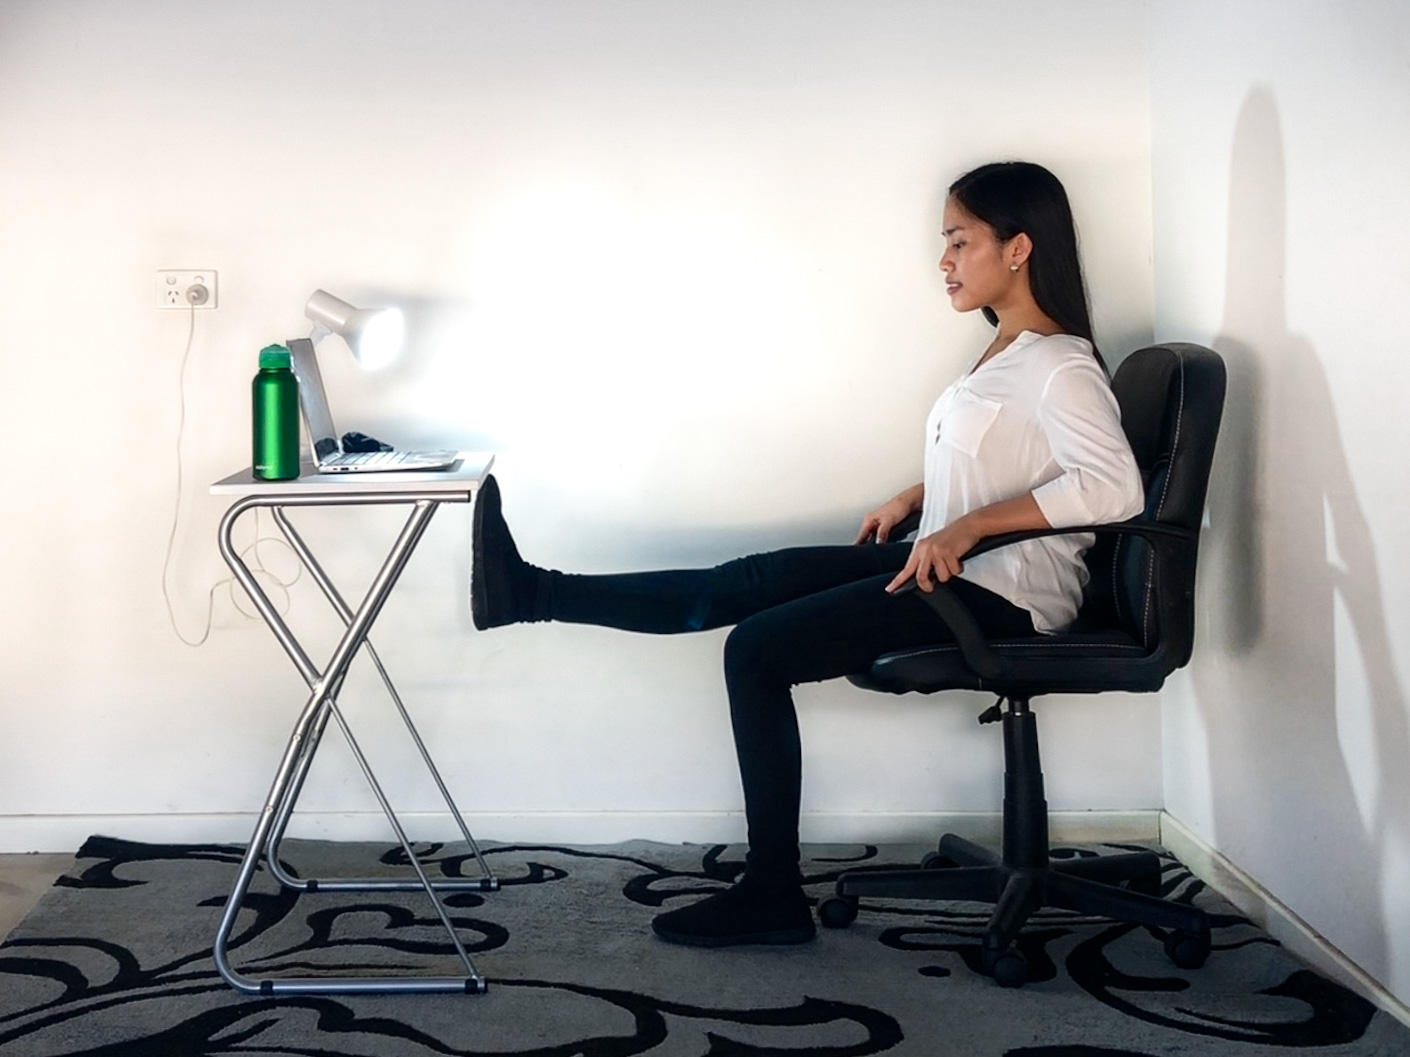 Get fit at your desk and seat - Ipswich Hospital Foundation